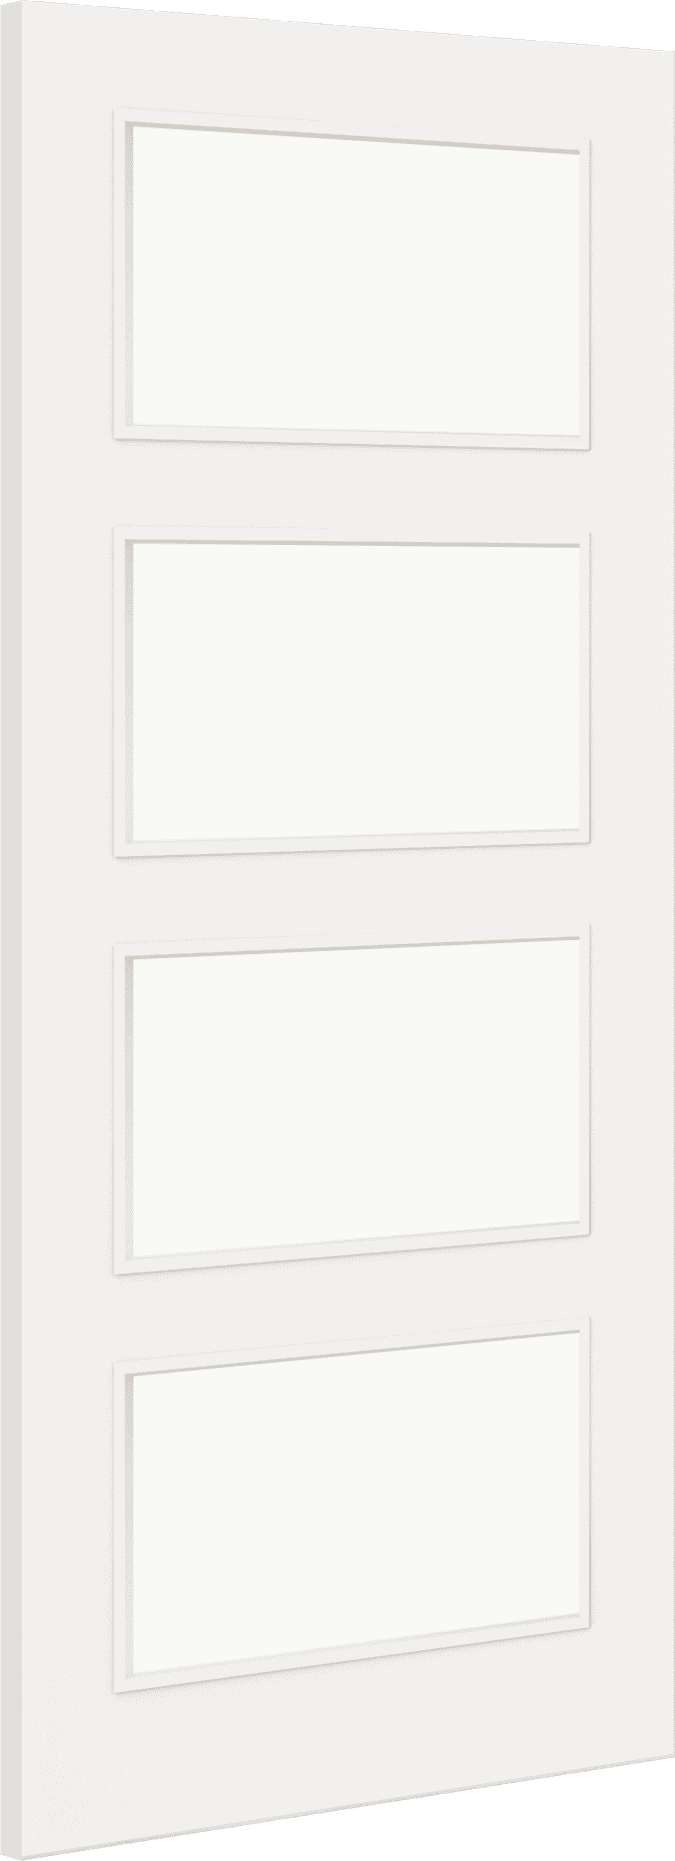 1981mm x 610mm x 44mm (24") Architectural Paint Grade White 04 Clear Glazed Fire Door Blank